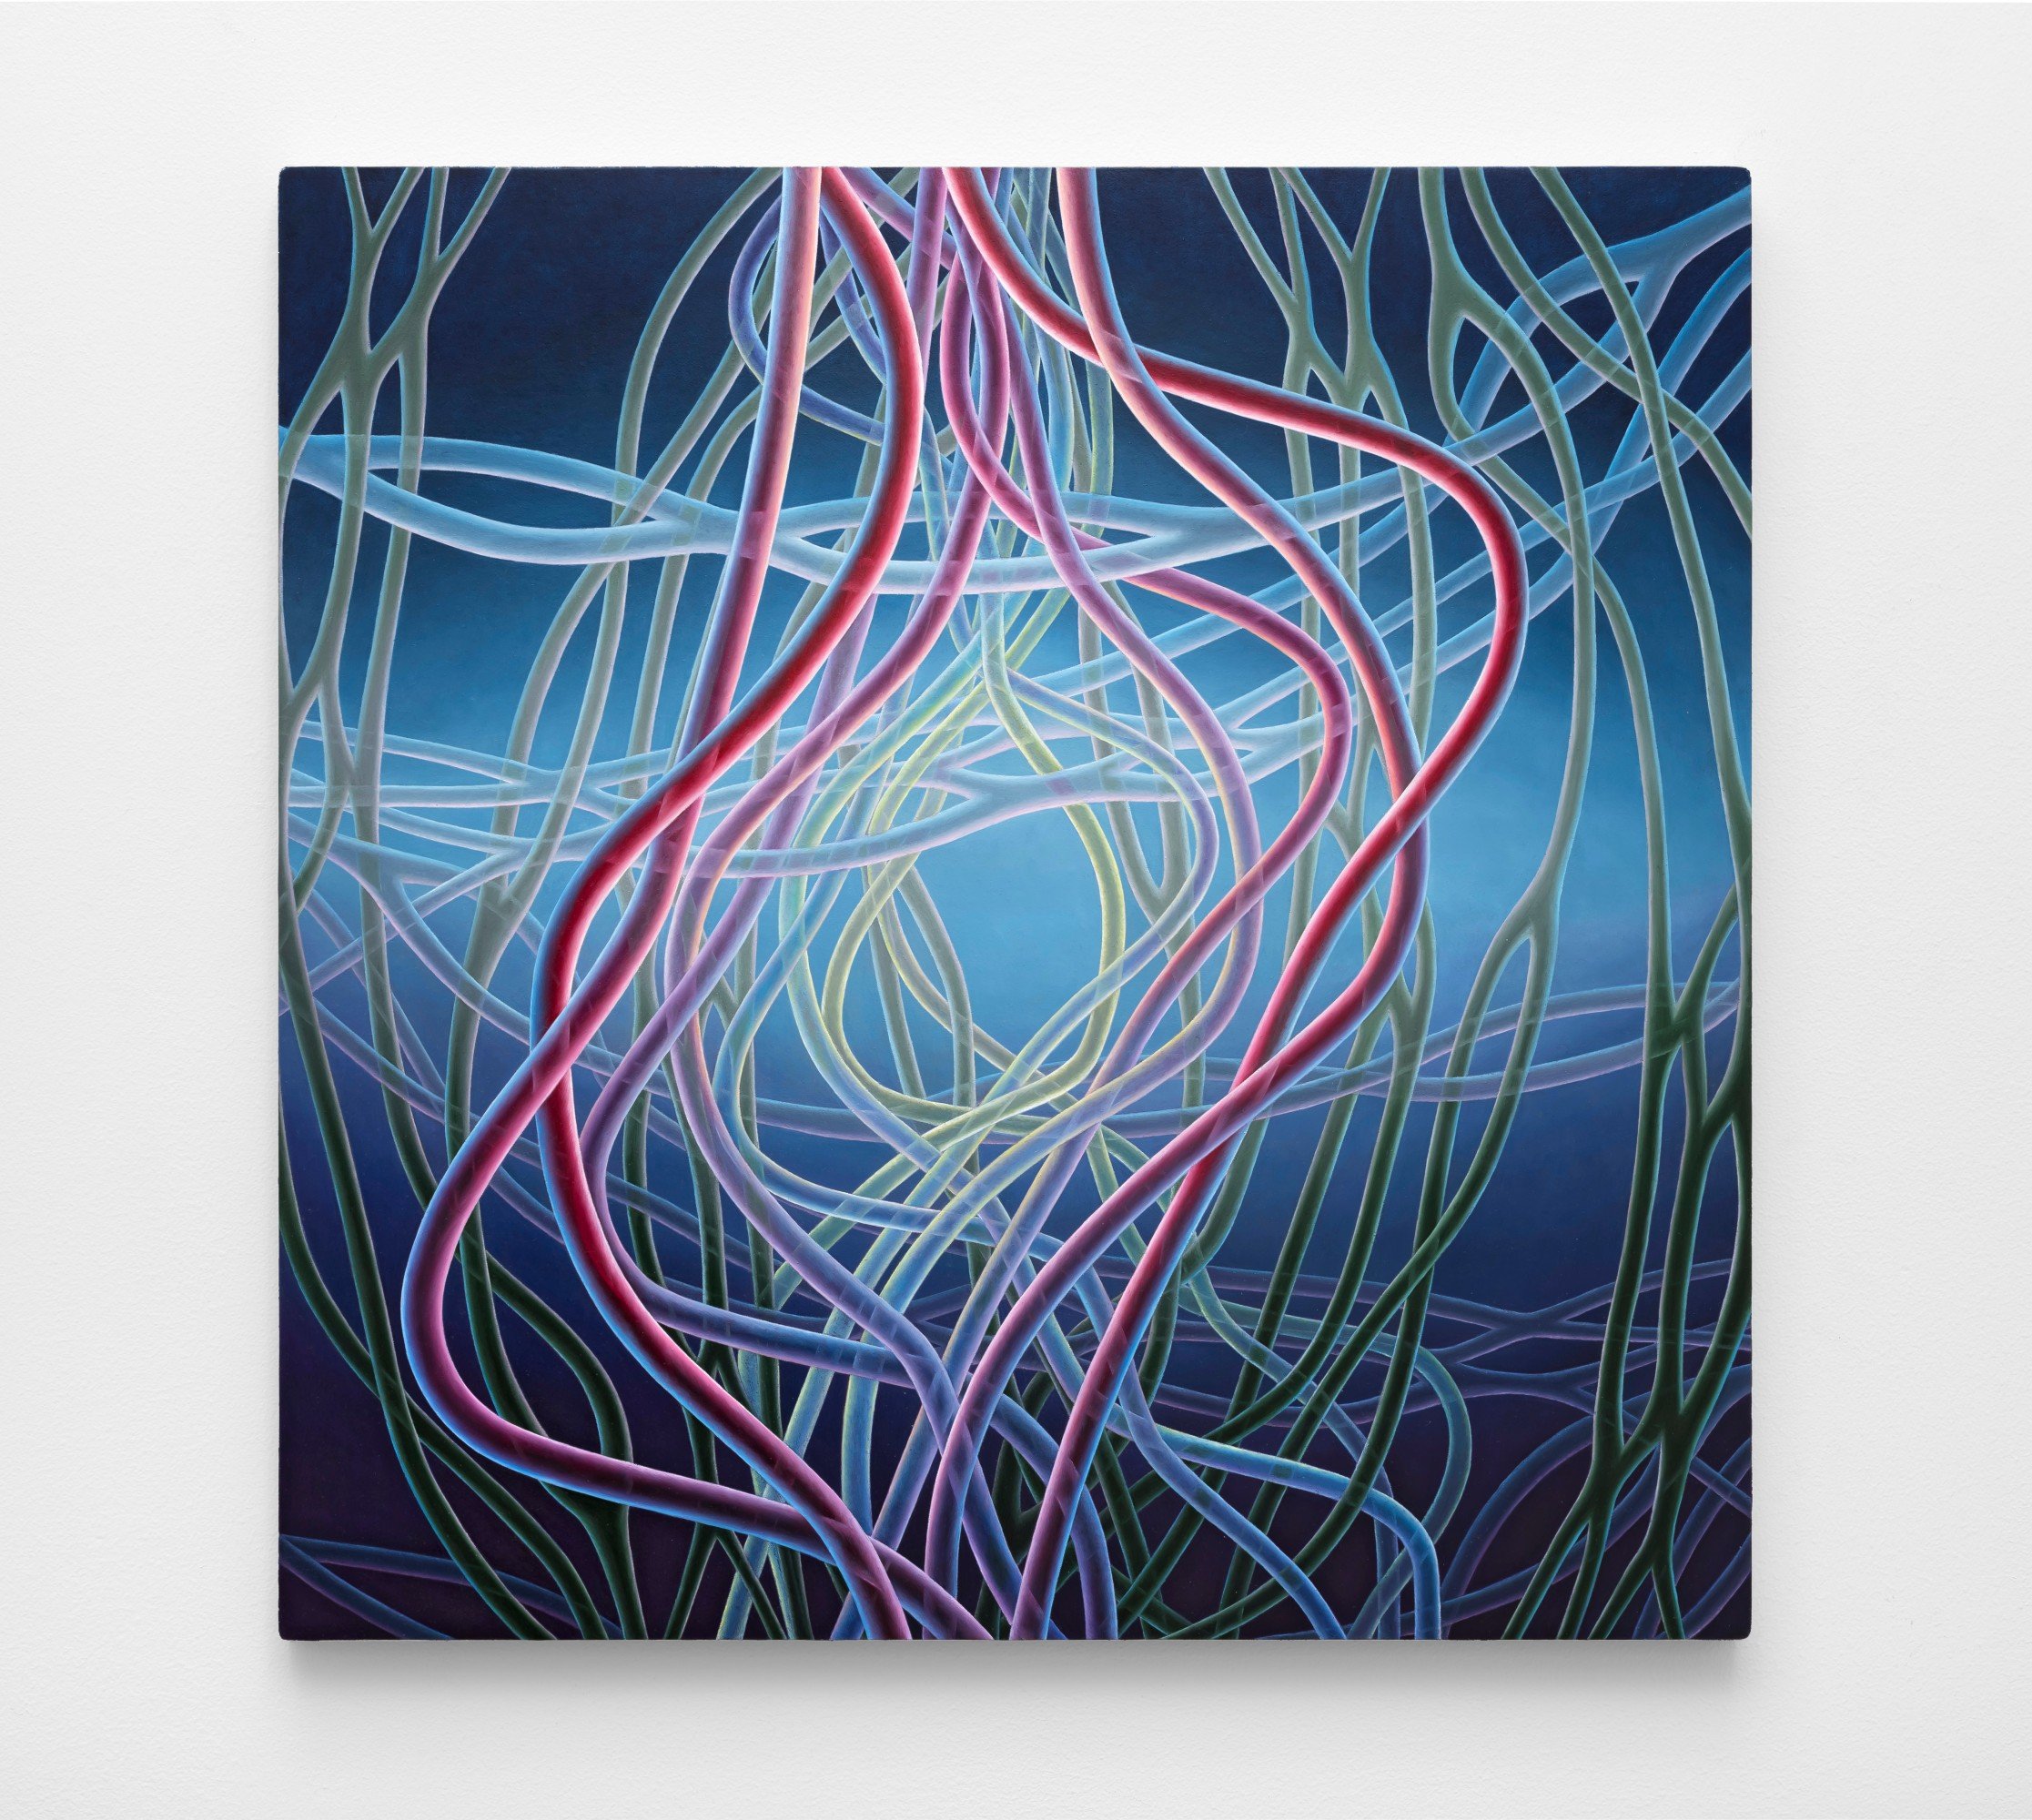 Kymber Holt (b. 1960) Entanglement, 2019  oil on canvas over panel 18 x 18 inches